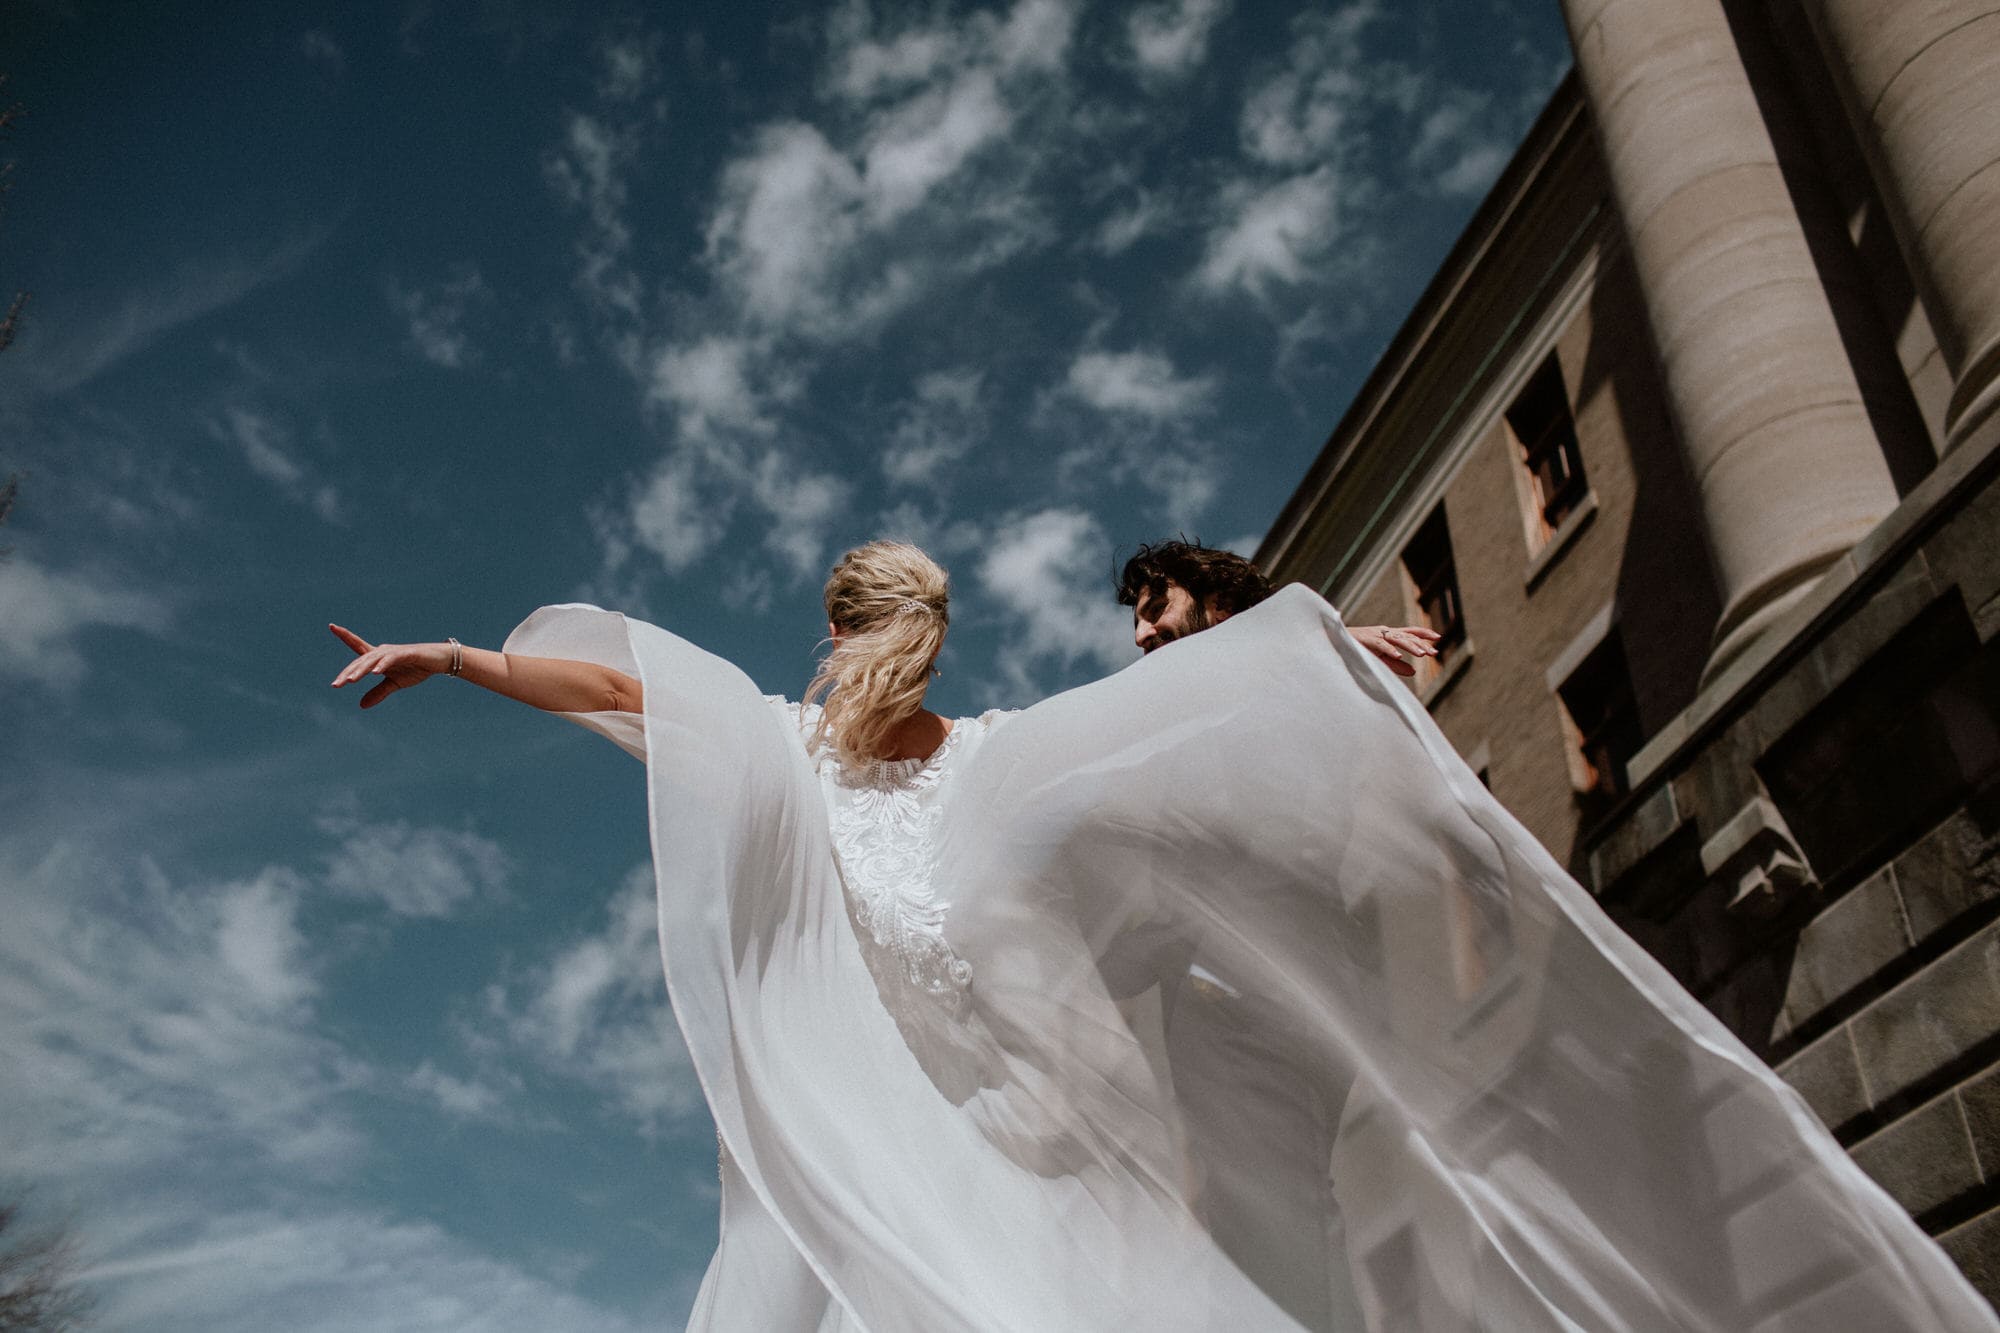 Entrepots Dominion Wedding In Montreal - Bride with flowing cape - Wedding Photographer Brent Calis